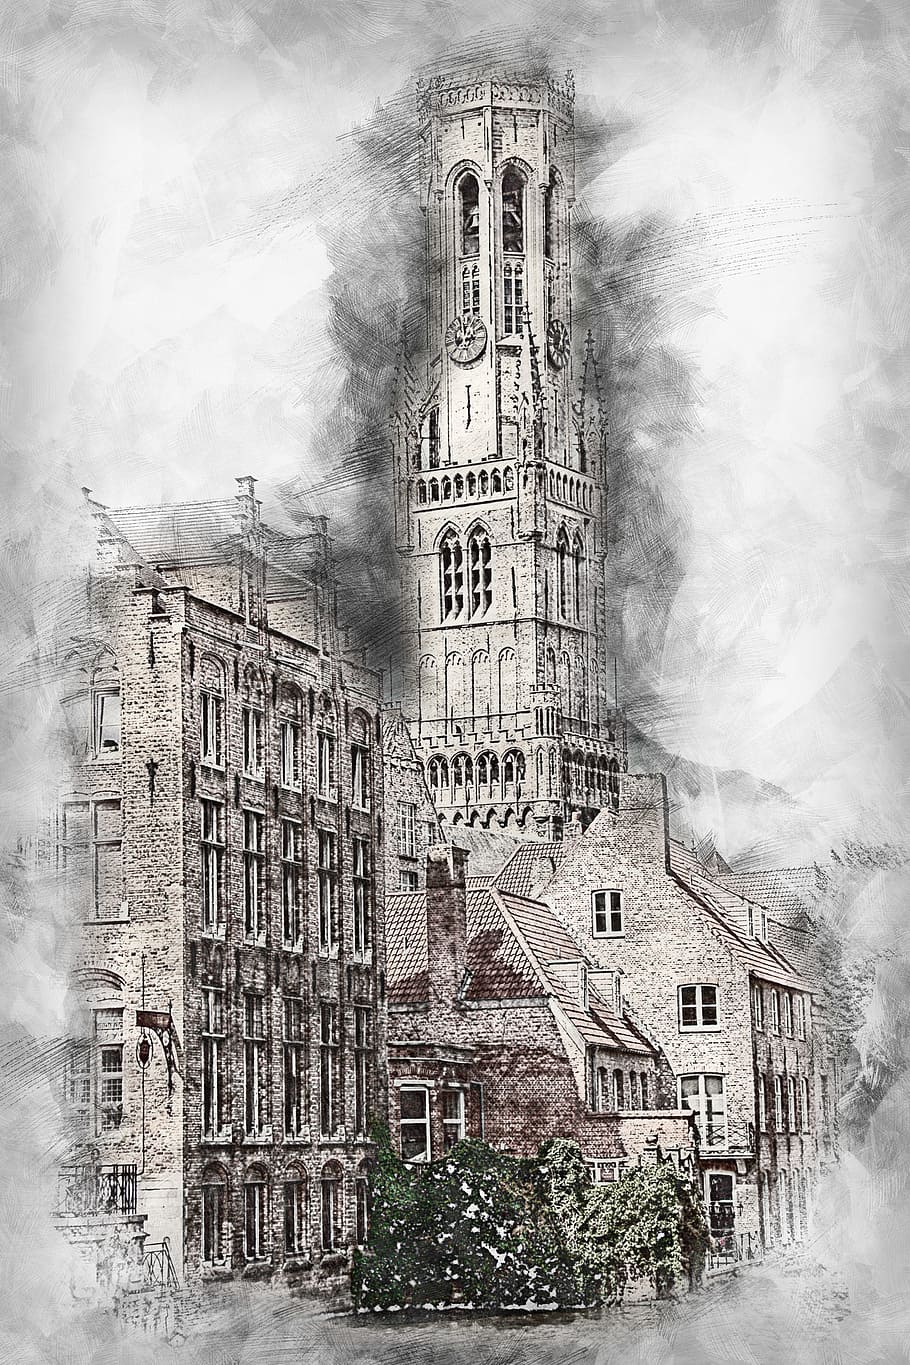 high-rise building sketch, belfry, tower, bruges, canal, channel, romantic, historically, places of interest, old town